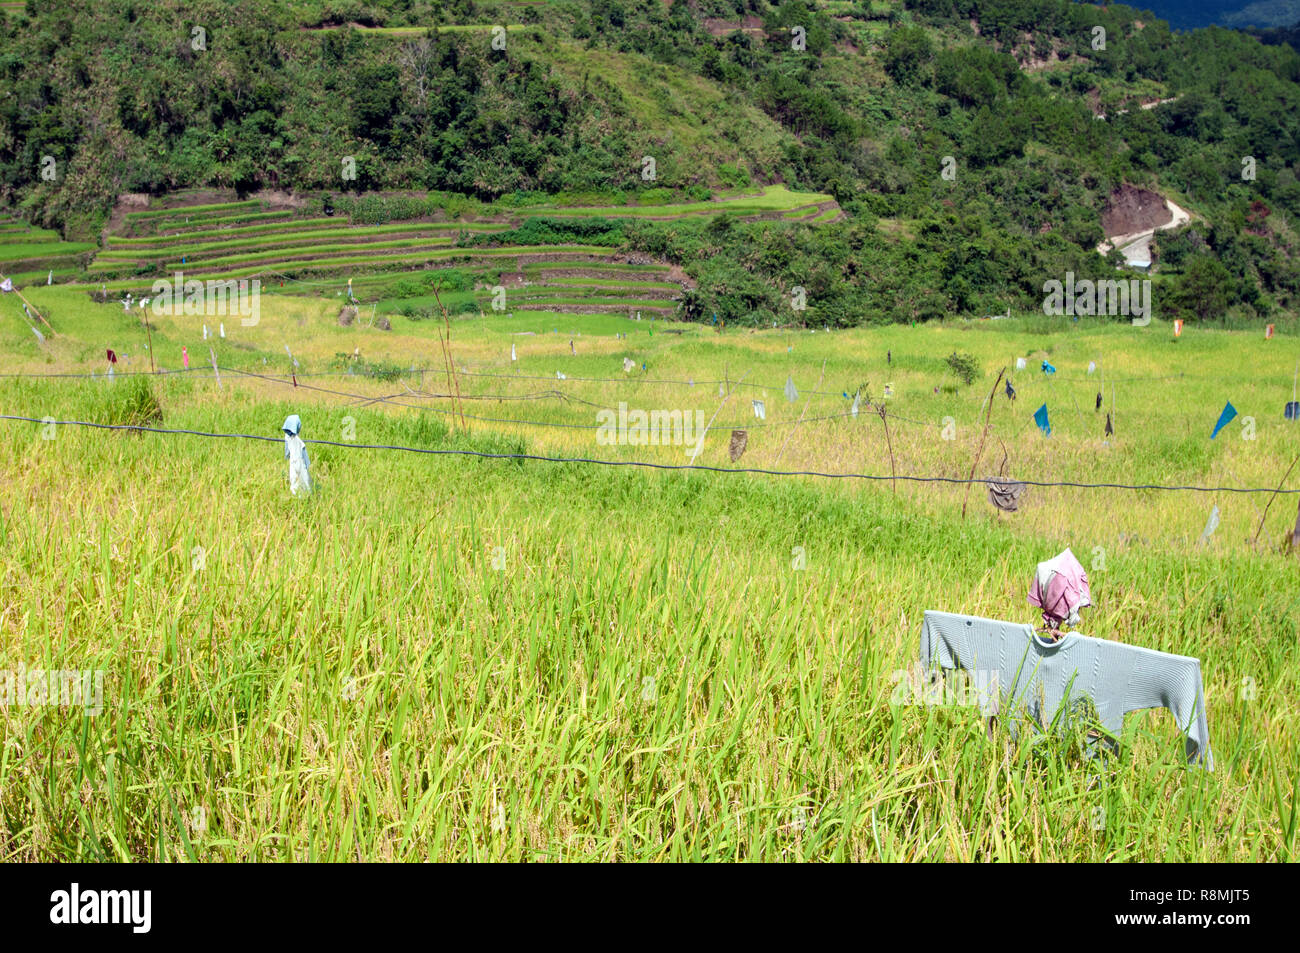 Scarecrow in fields at Maligcong Rice Terraces, Bontoc, Mountain Province, Luzon, Philippines, Asia Stock Photo